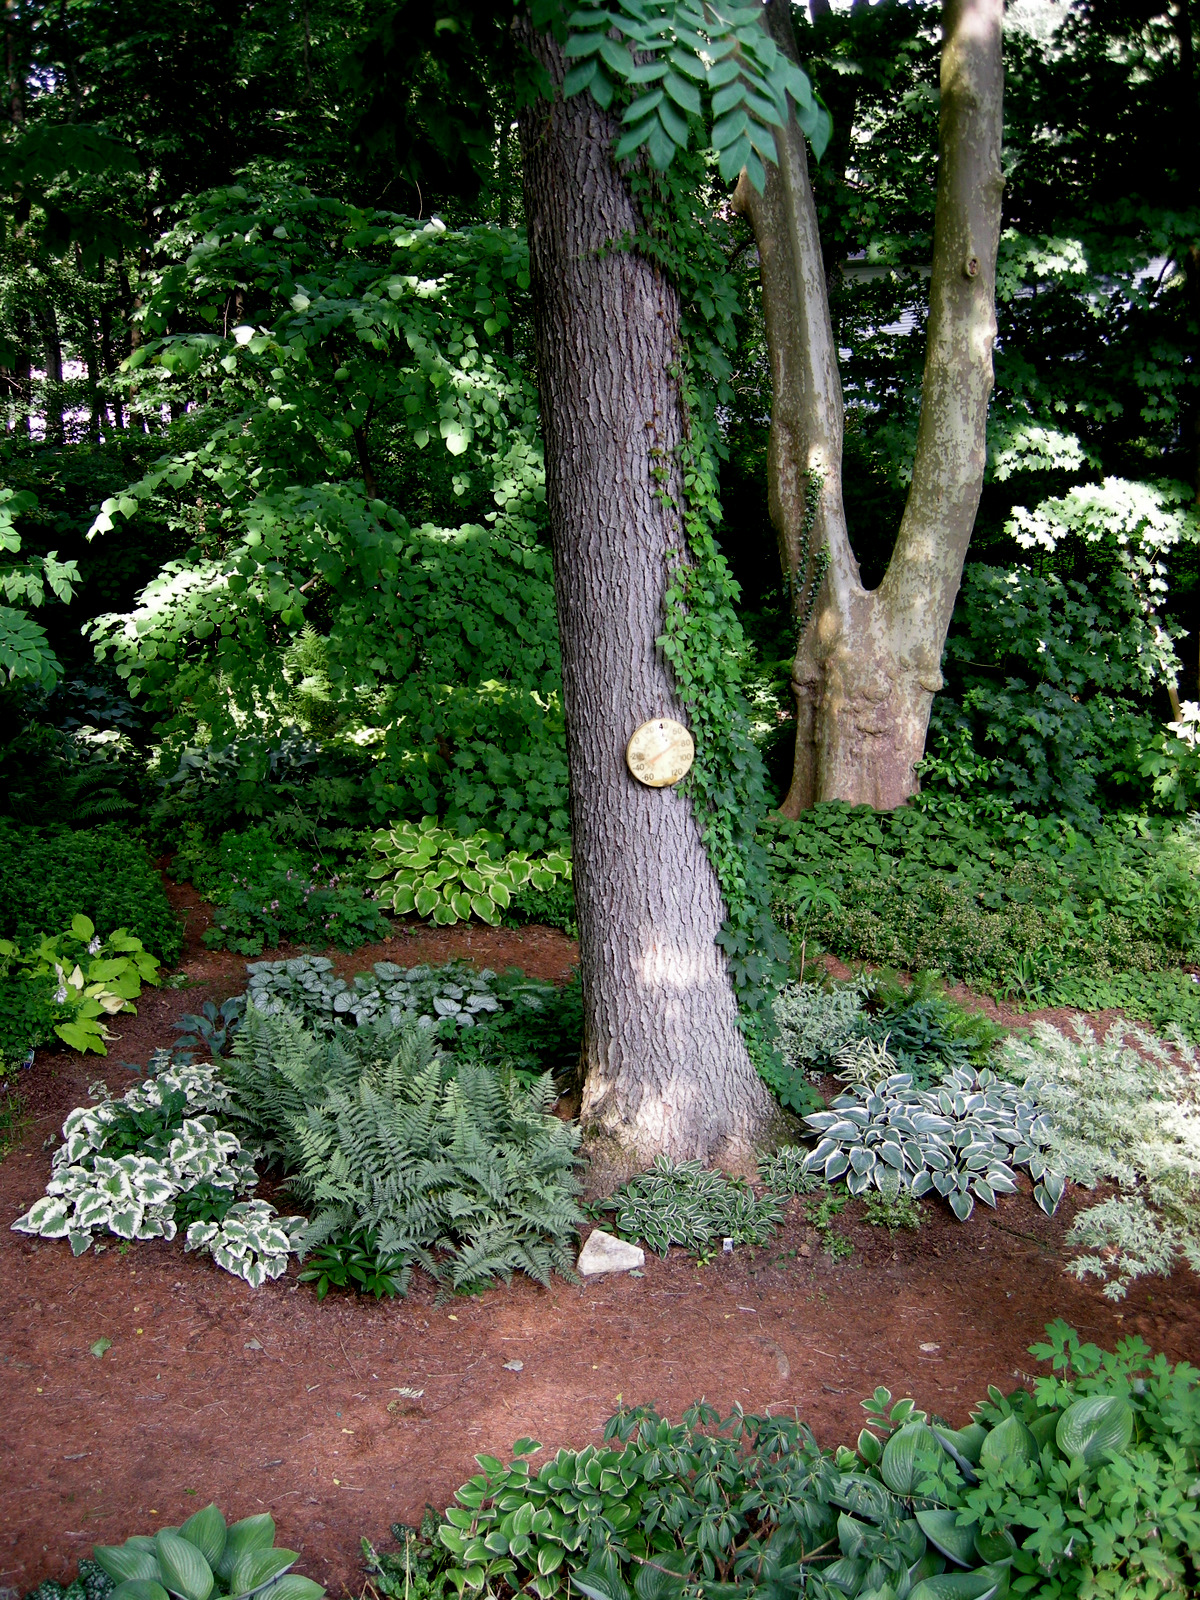 Landscaping Under Pine Trees Pictures Creating a Beautiful Outdoor Space